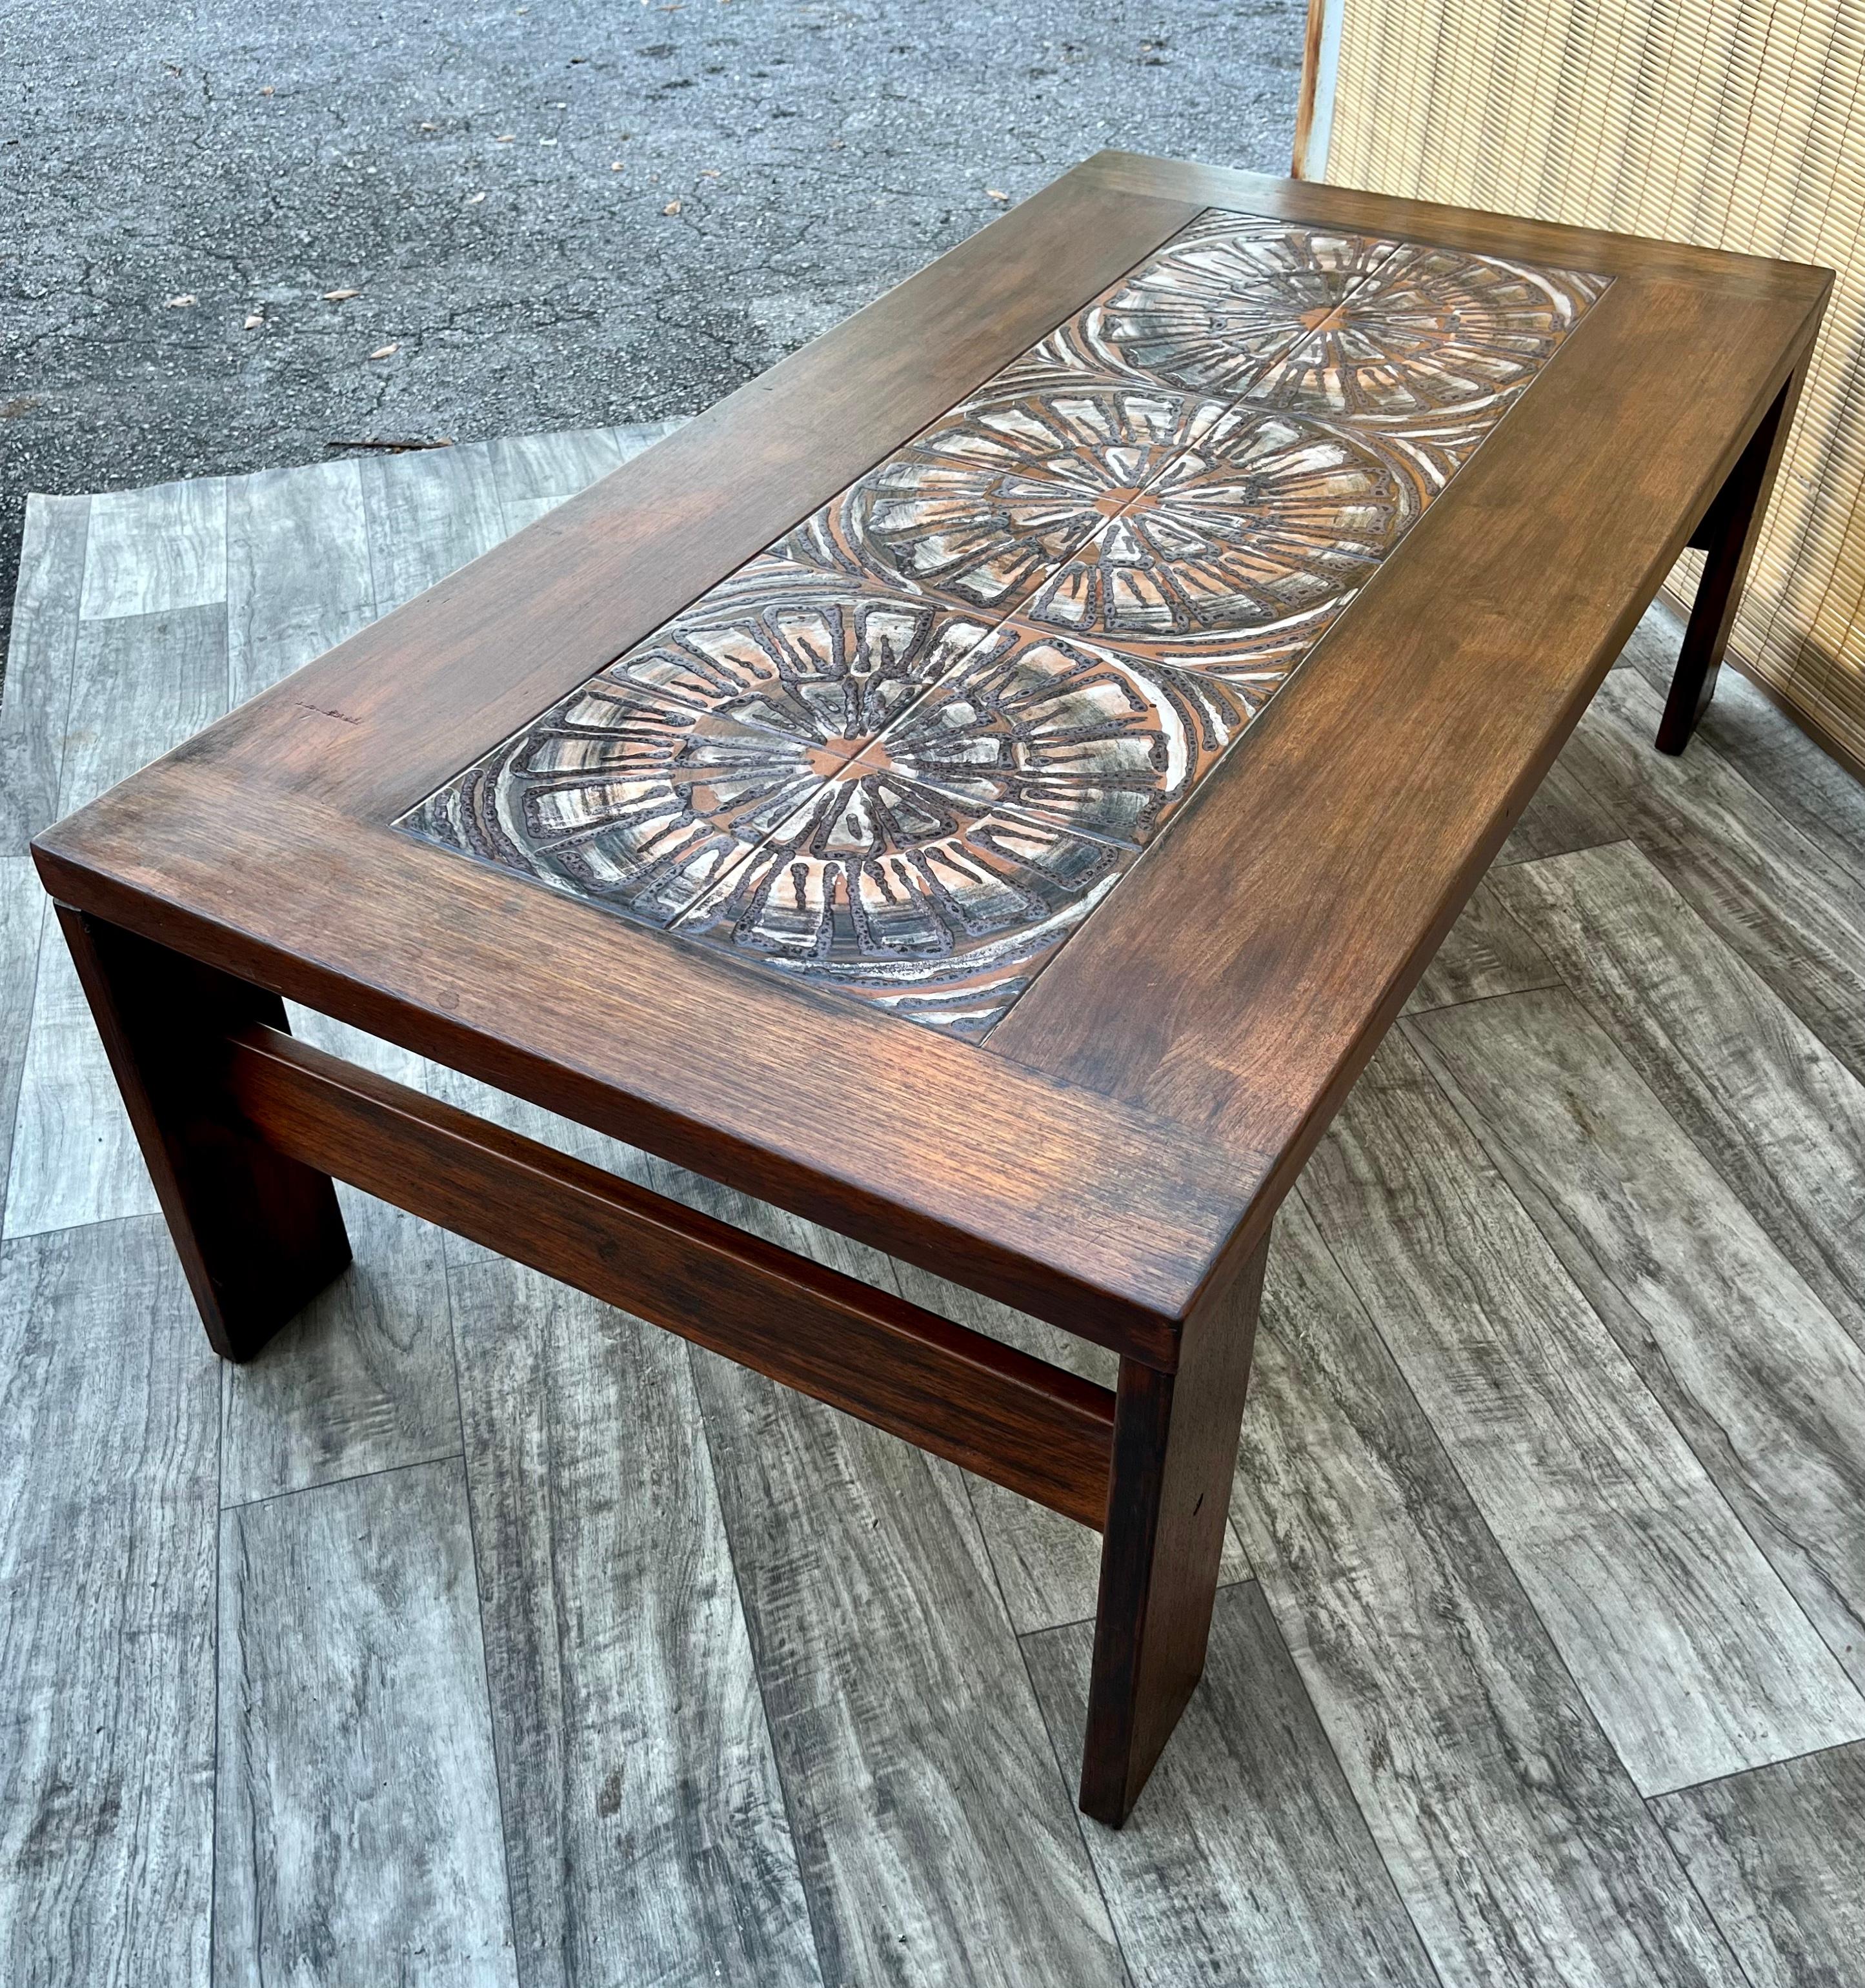 Danish Mid Century Modern Coffee Table With Ceramic Tile Inlays. Circa 1960s  For Sale 12